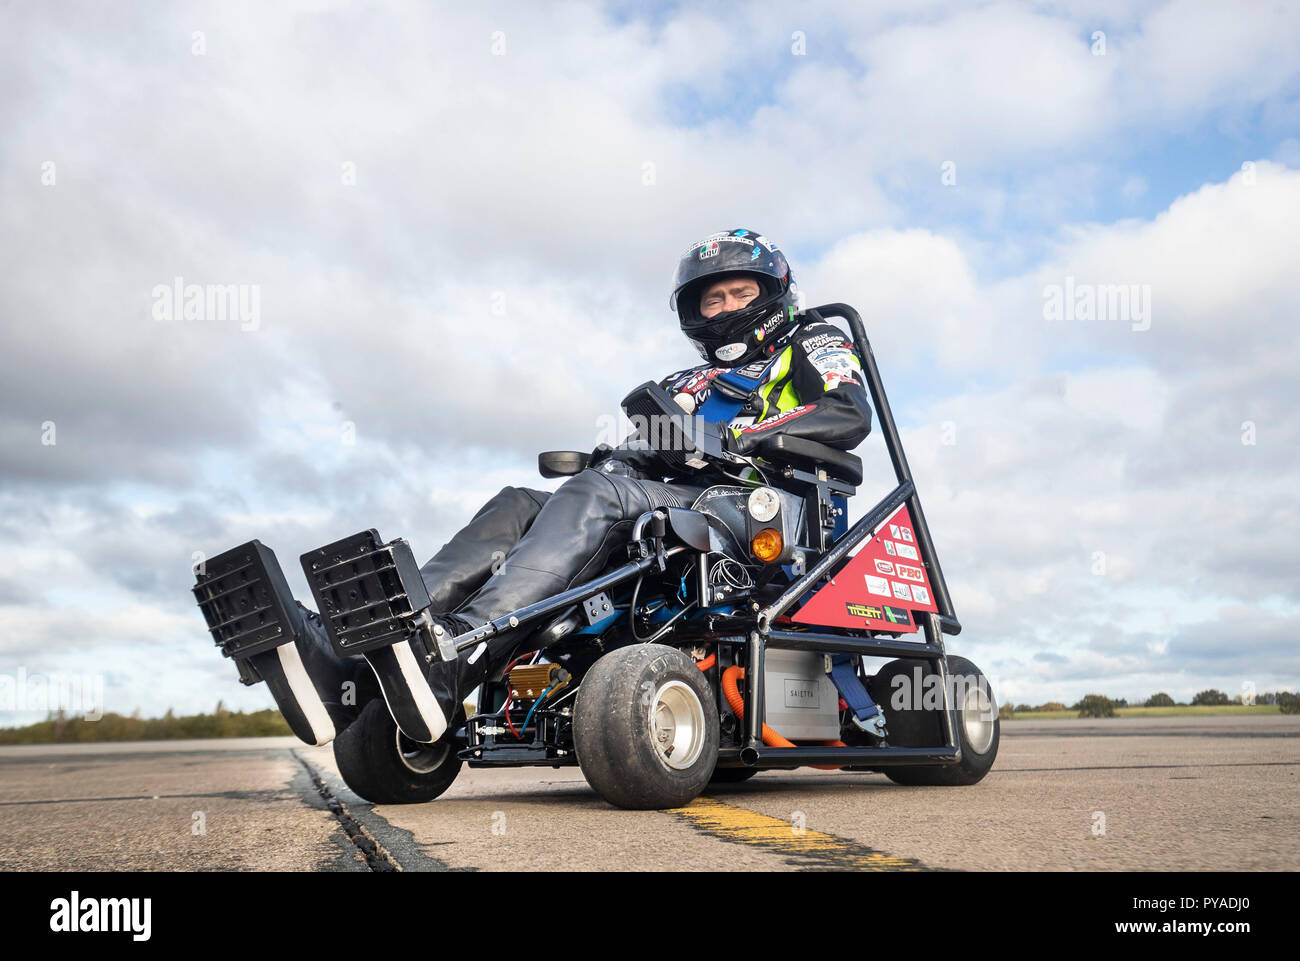 Jason Liversidge, who has Motor Neurone Disease, hopes to set world speed records in his purpose built electric wheelchair at Elvington Airfield in North Yorkshire. Stock Photo